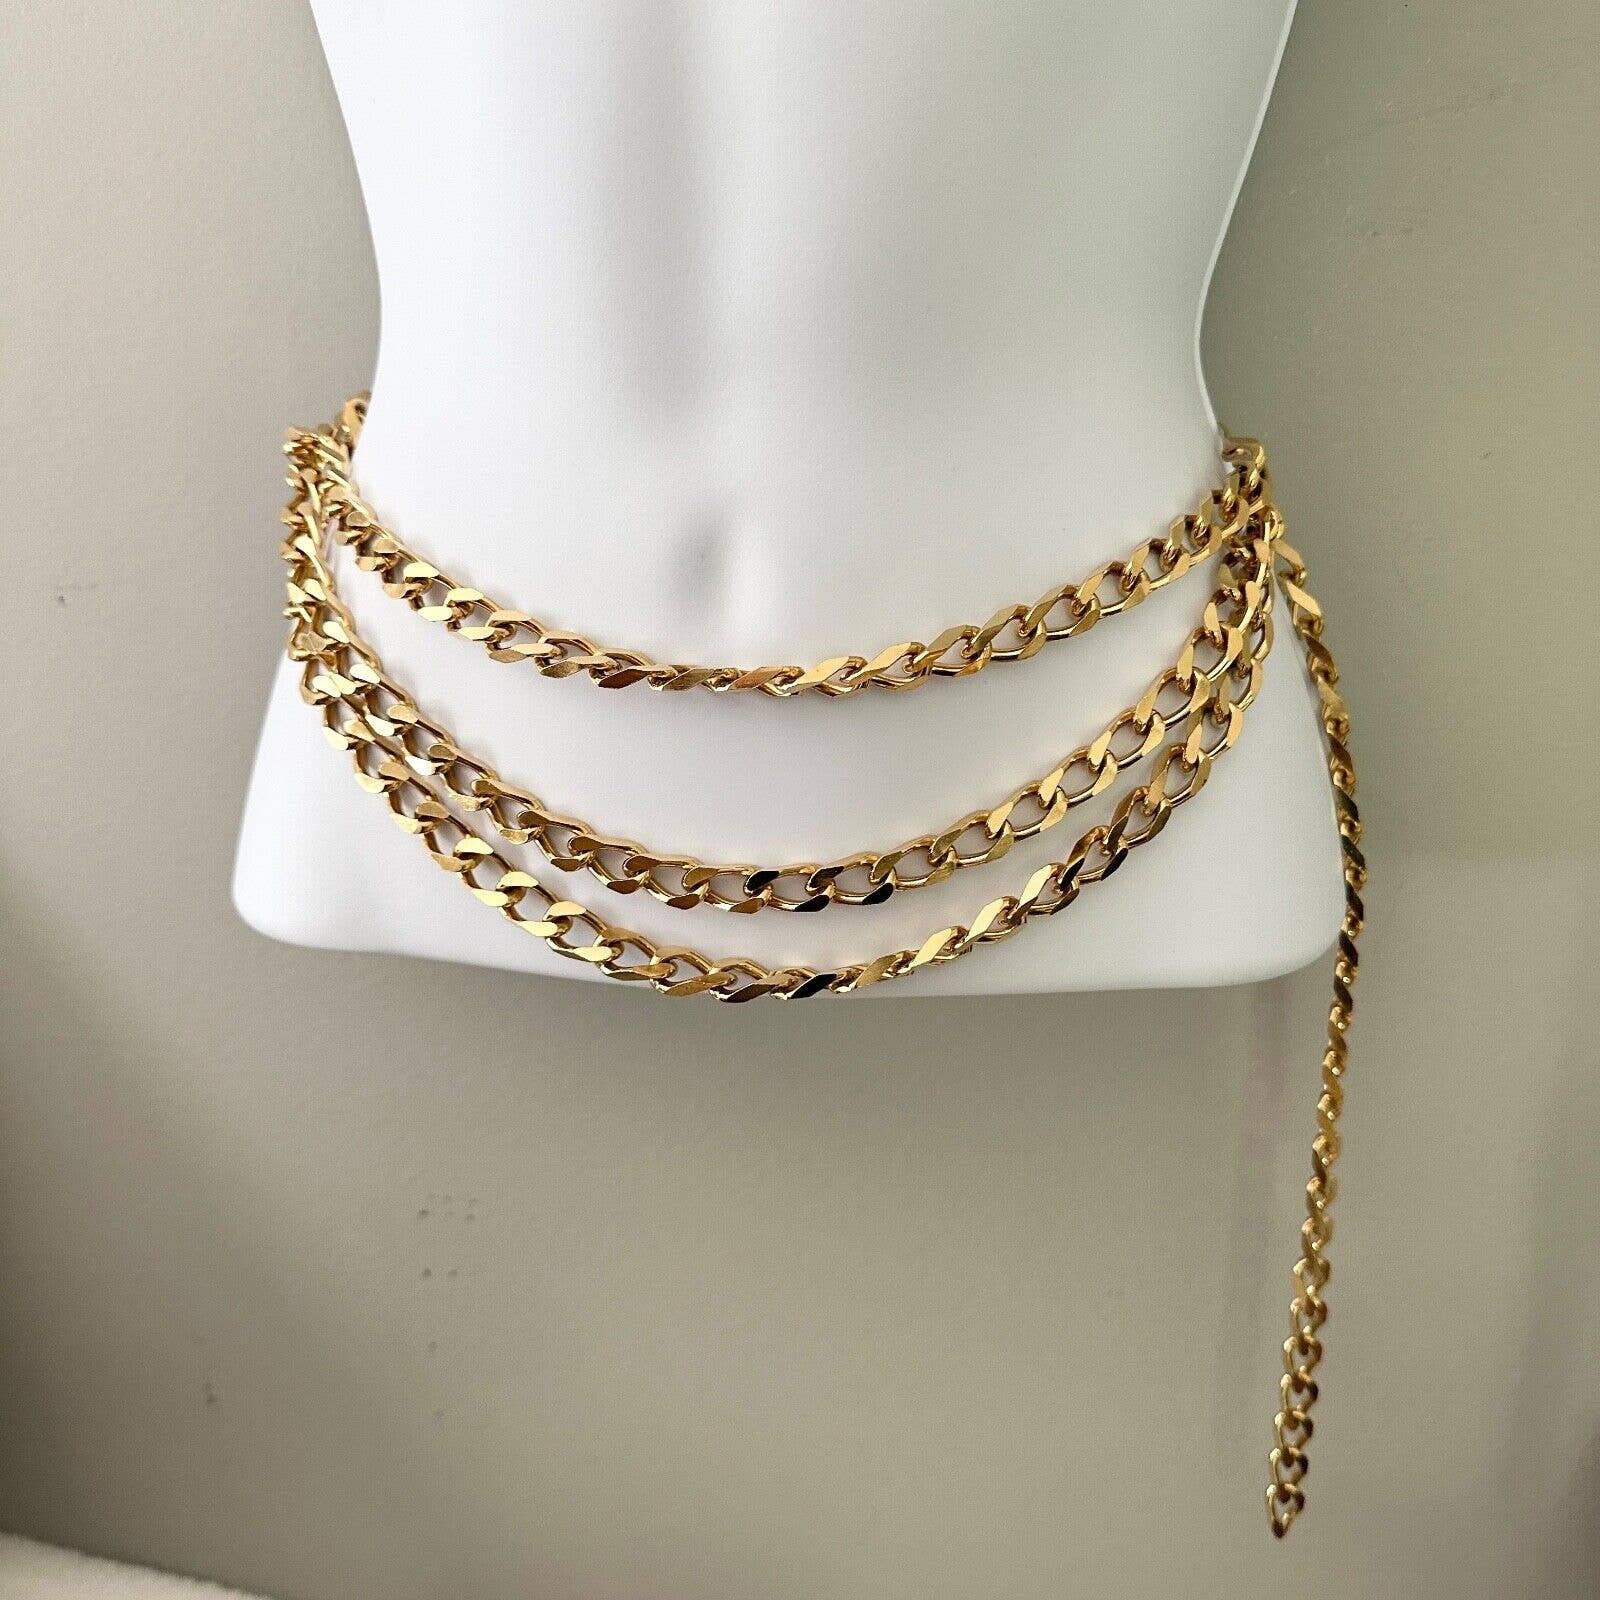 Vintage CHANEL Perfume Bottle Charm Tiered Chain Necklace Belt 